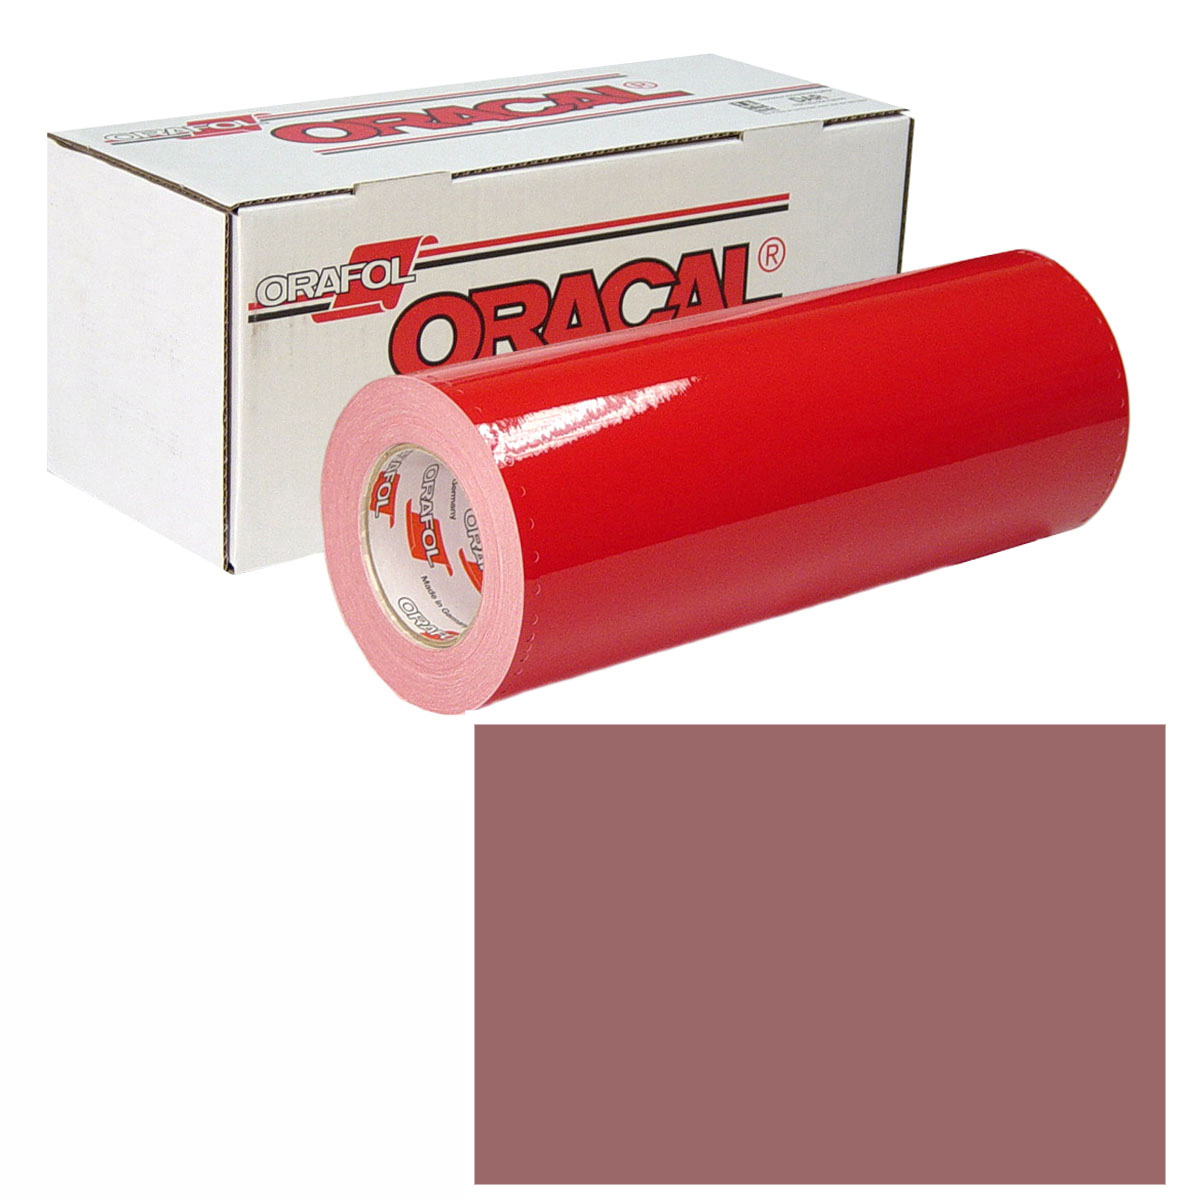 ORACAL 951 15in X 10yd 079 Red Brown